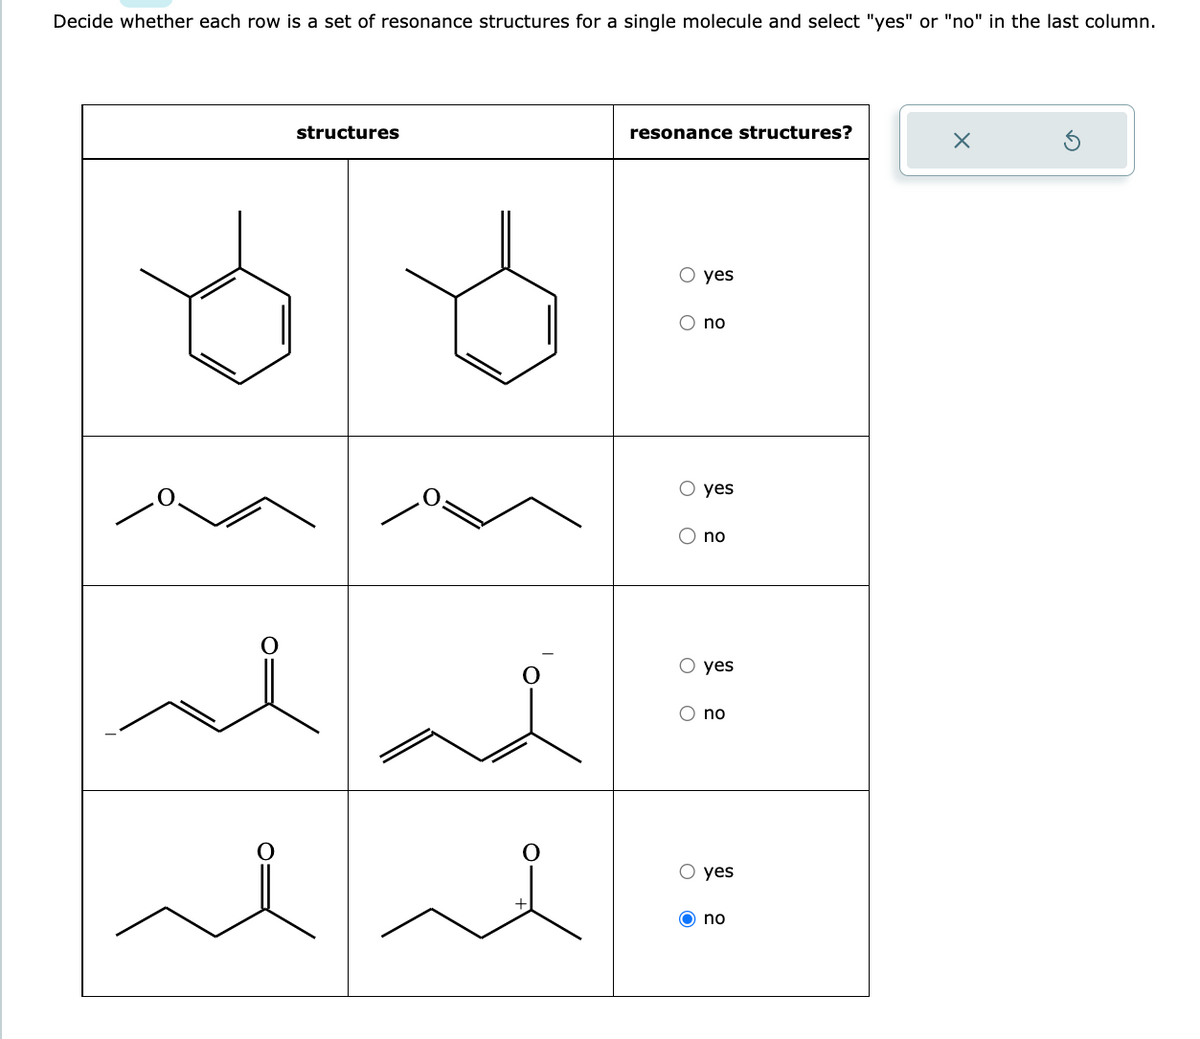 Decide whether each row is a set of resonance structures for a single molecule and select "yes" or "no" in the last column.
structures
resonance structures?
OO
O
O
yes
no
yes
no
O yes
O no
yes
no